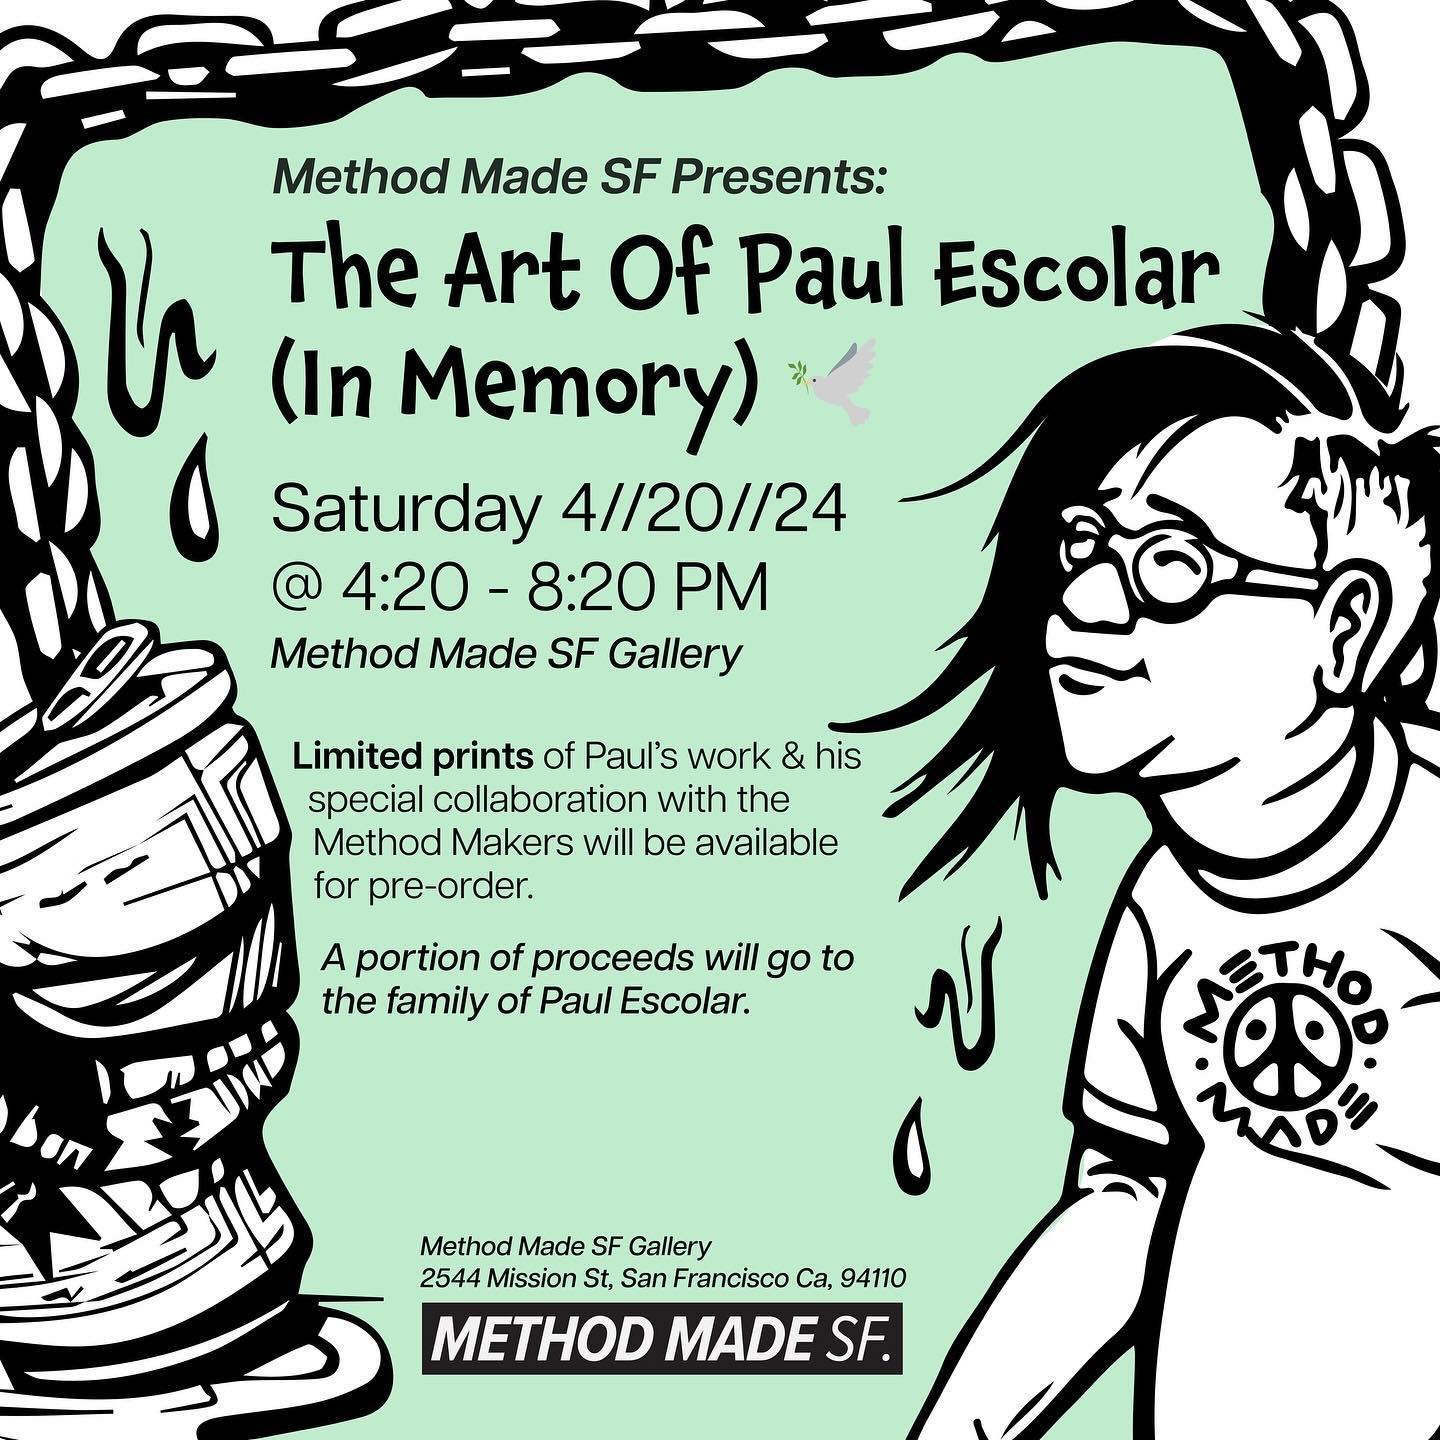 A flier for an art show in Paul Escolar's honor. It shows a self-portrait of Paul in a Method Made shirt and a chain link going from him to a can of beer. The flier says: "Method Made SF Presents: The Art Of Paul Escolar (In Memory) - Saturday 4/20/24 from 4:20 to 8:20 PM at Method Made SF Gallery. Limited prints of Paul’s work & his collaboration with the Method Maker available for pre-order."